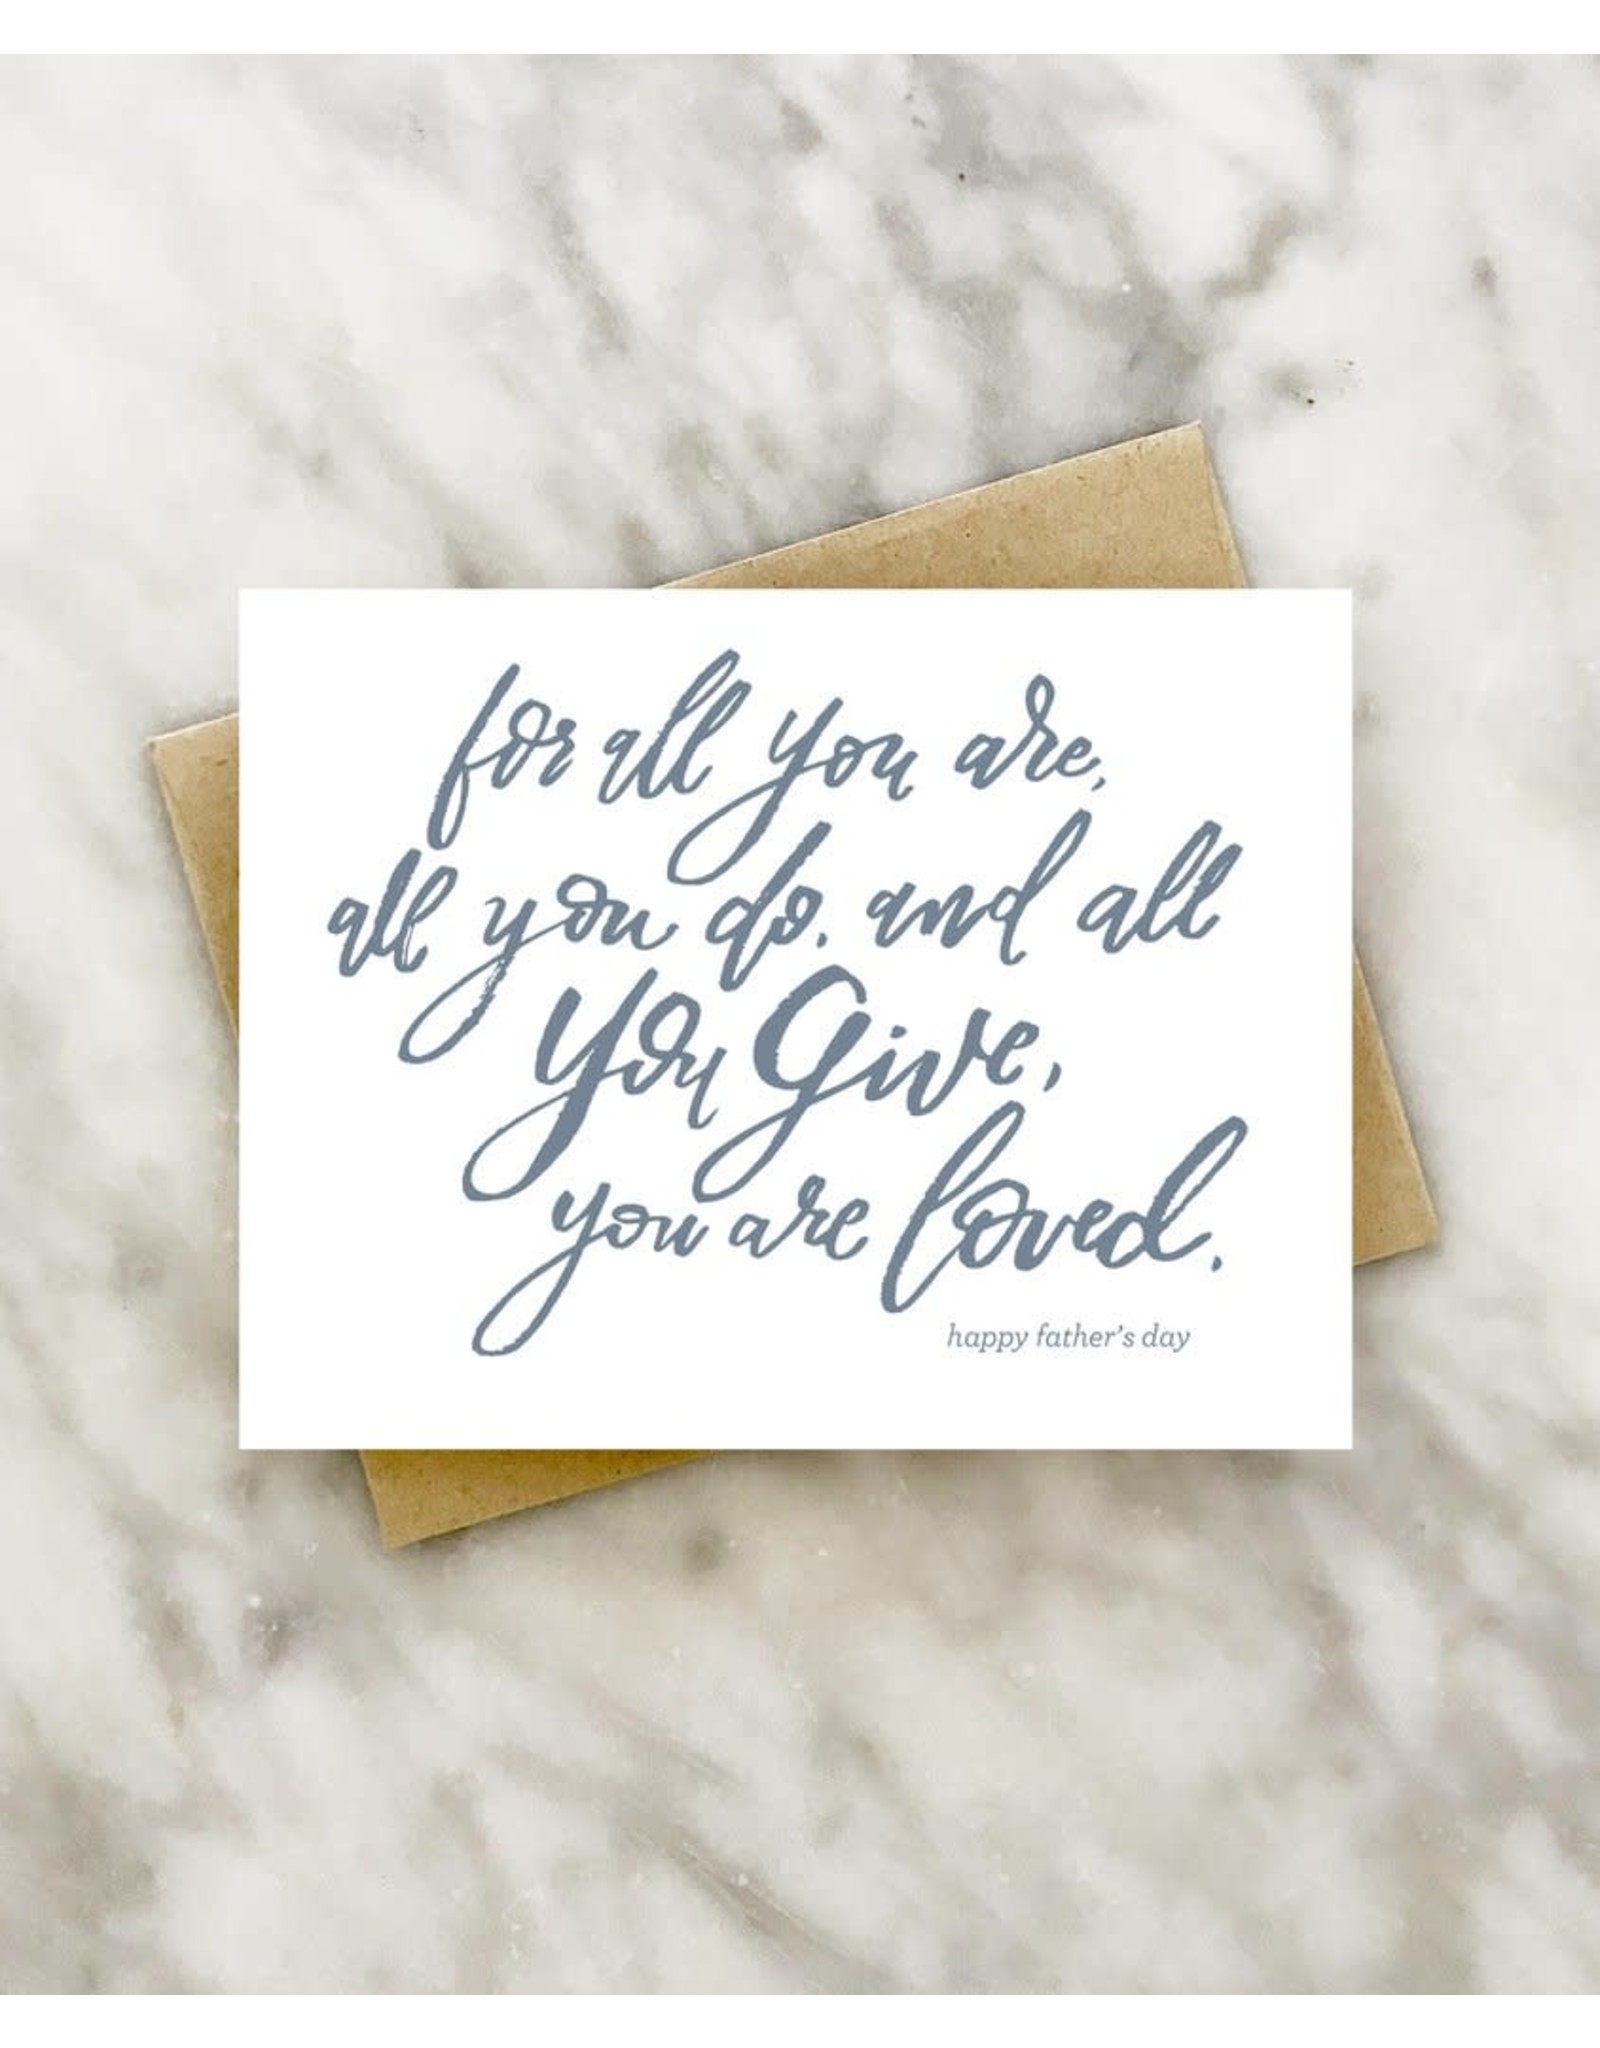 21 co Father's Day "You are Loved" Greeting Card